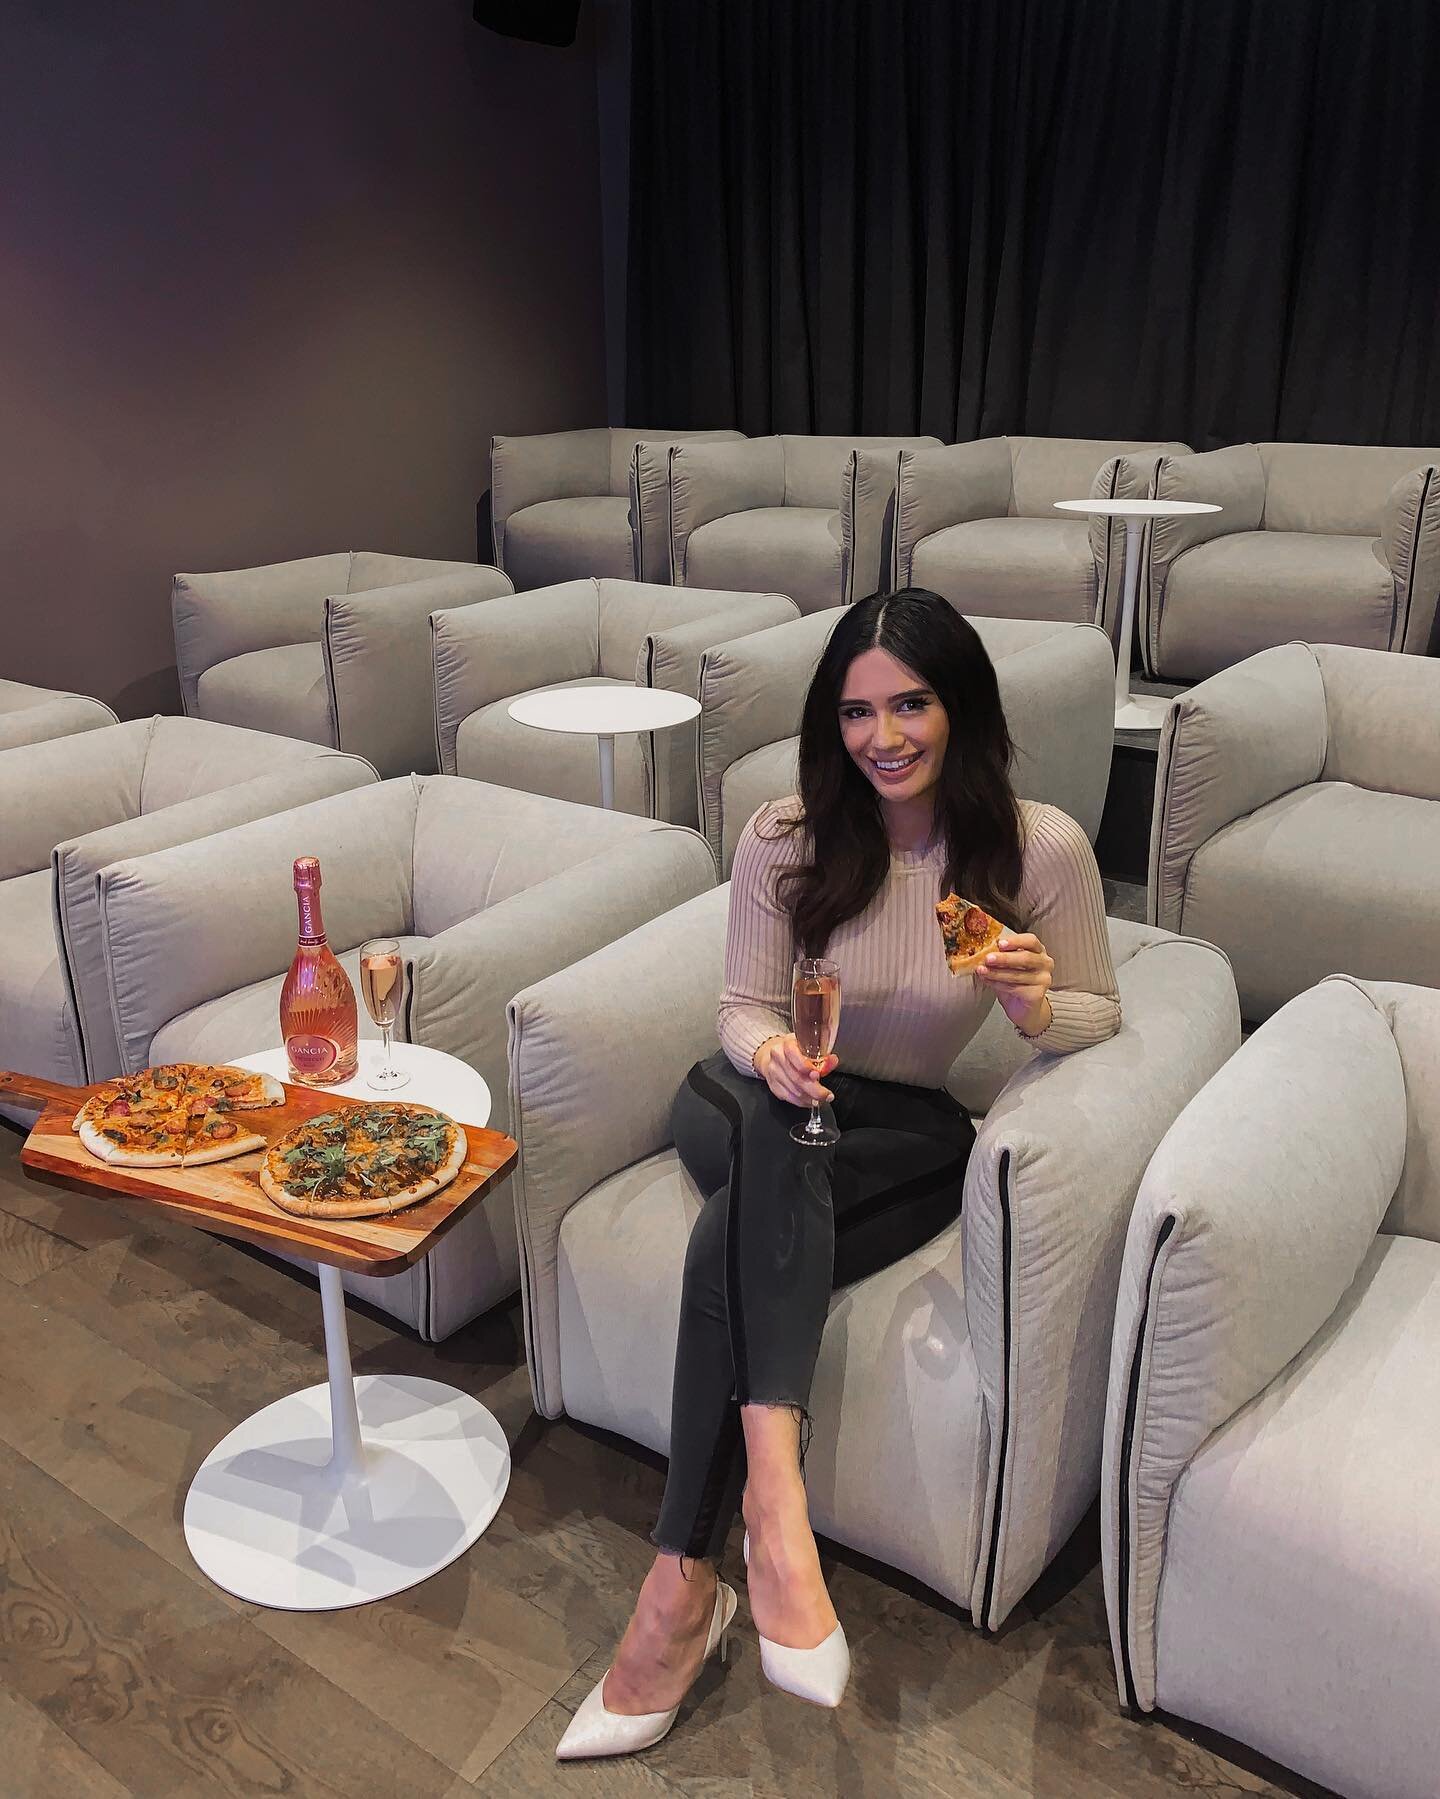 🍕❤️ GIVEAWAY! ❤️🍕 ad

Last week Chris and I hosted friends for a Pizza &amp; Movie Night in our private cinema! We cooked up some freshly baked @mccain_nz NEW Rustica Sourdough Pizza which paired perfectly with @gancia1850 Prosecco Ros&eacute; befo